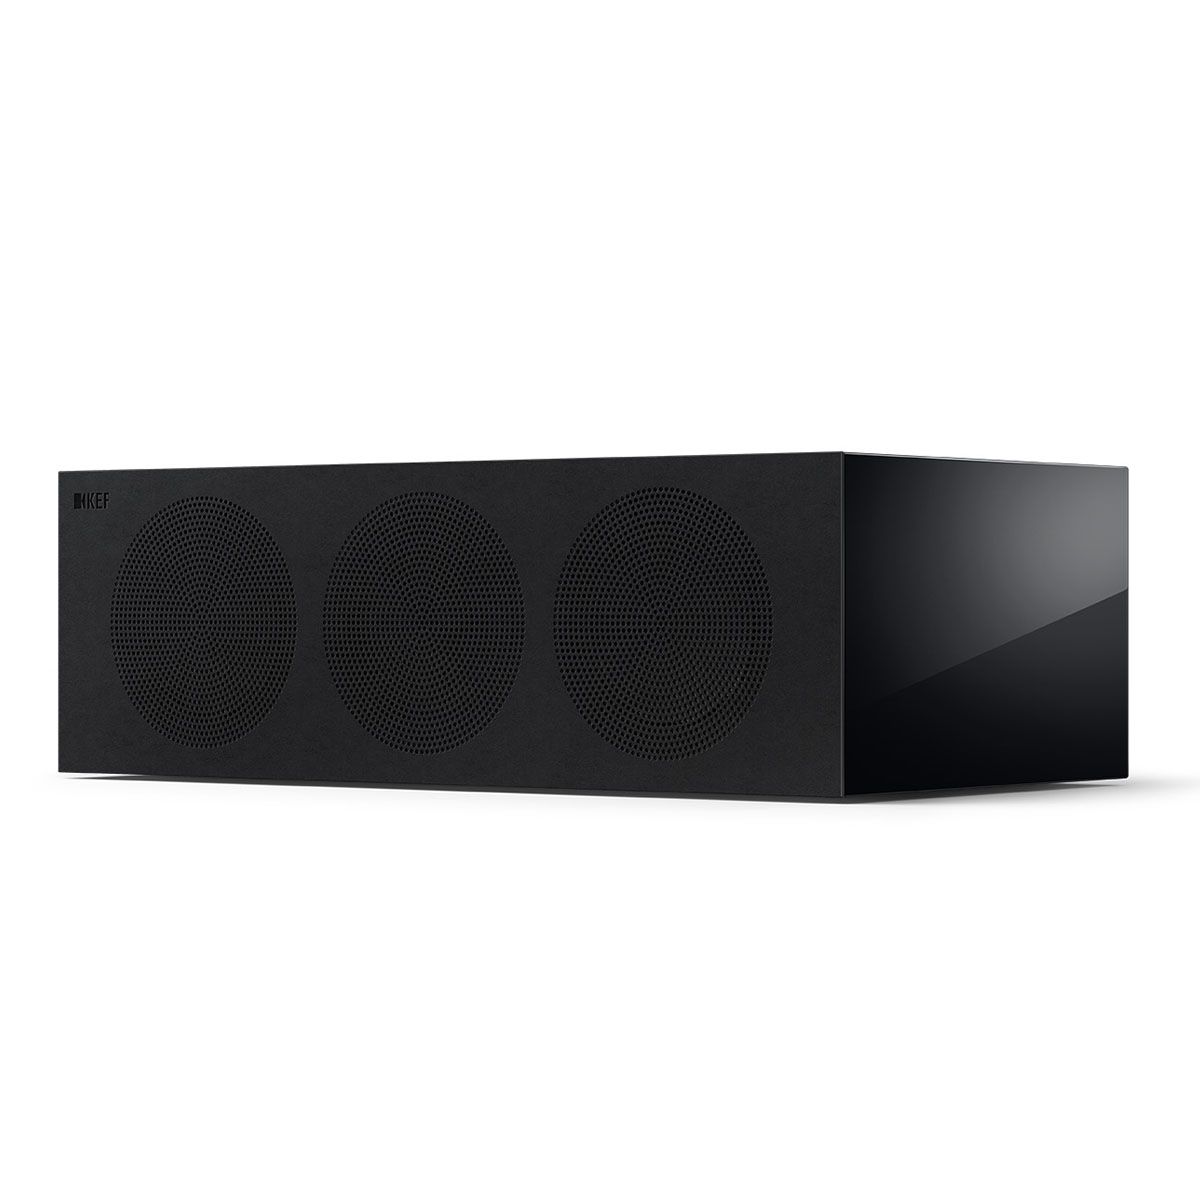 KEF R2 Meta LCR Speaker - Each black angled front view with grille